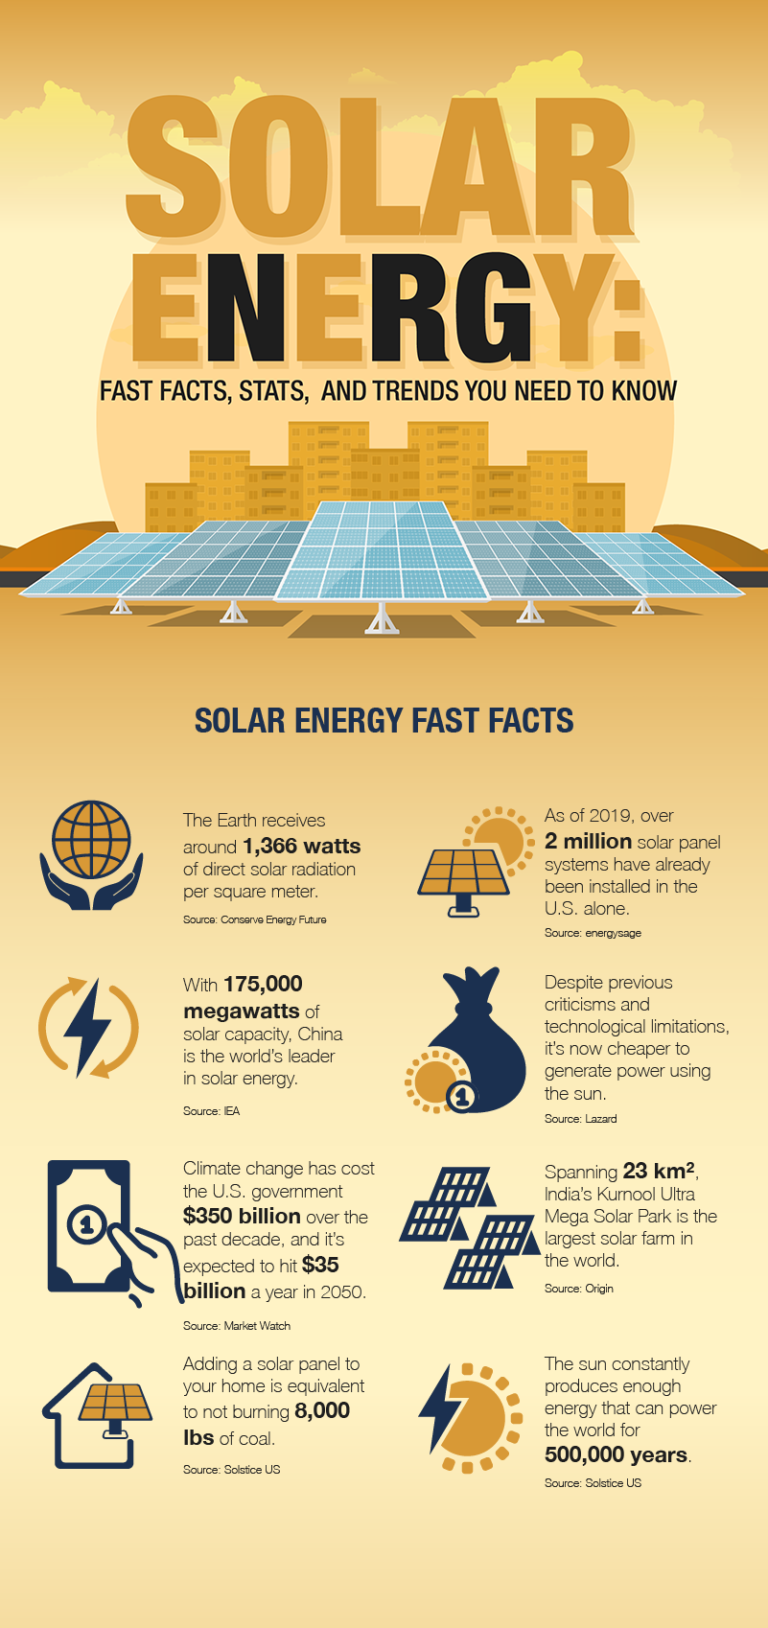 Solar Energy Fast Facts, Stats, and Trends You Need to Know